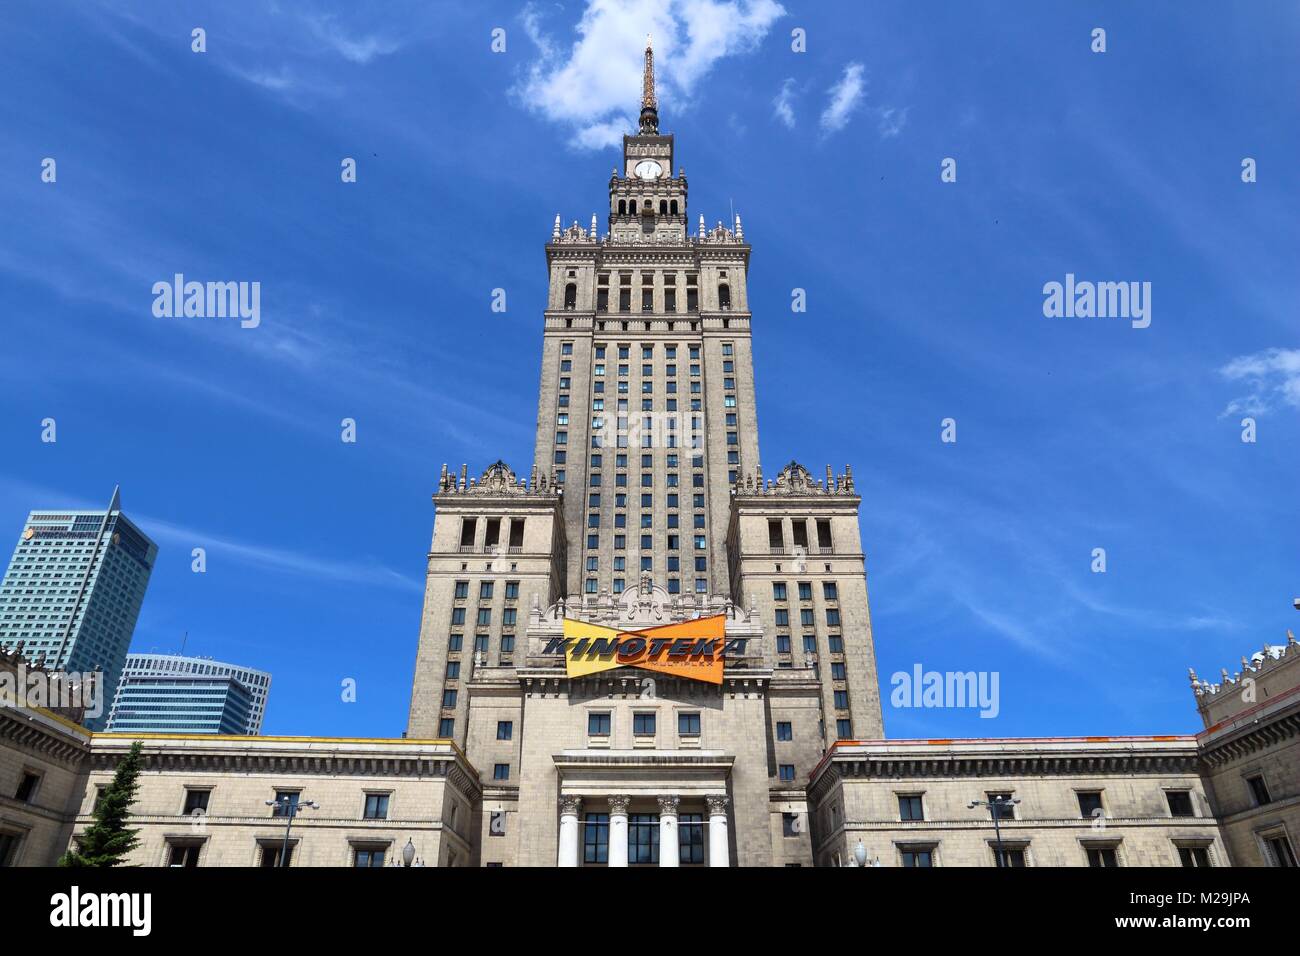 WARSAW, POLAND - JUNE 19, 2016: Exterior view of Palace of Culture and Science in Warsaw, Poland. Warsaw is the capital city of Poland. 1.7 million pe Stock Photo